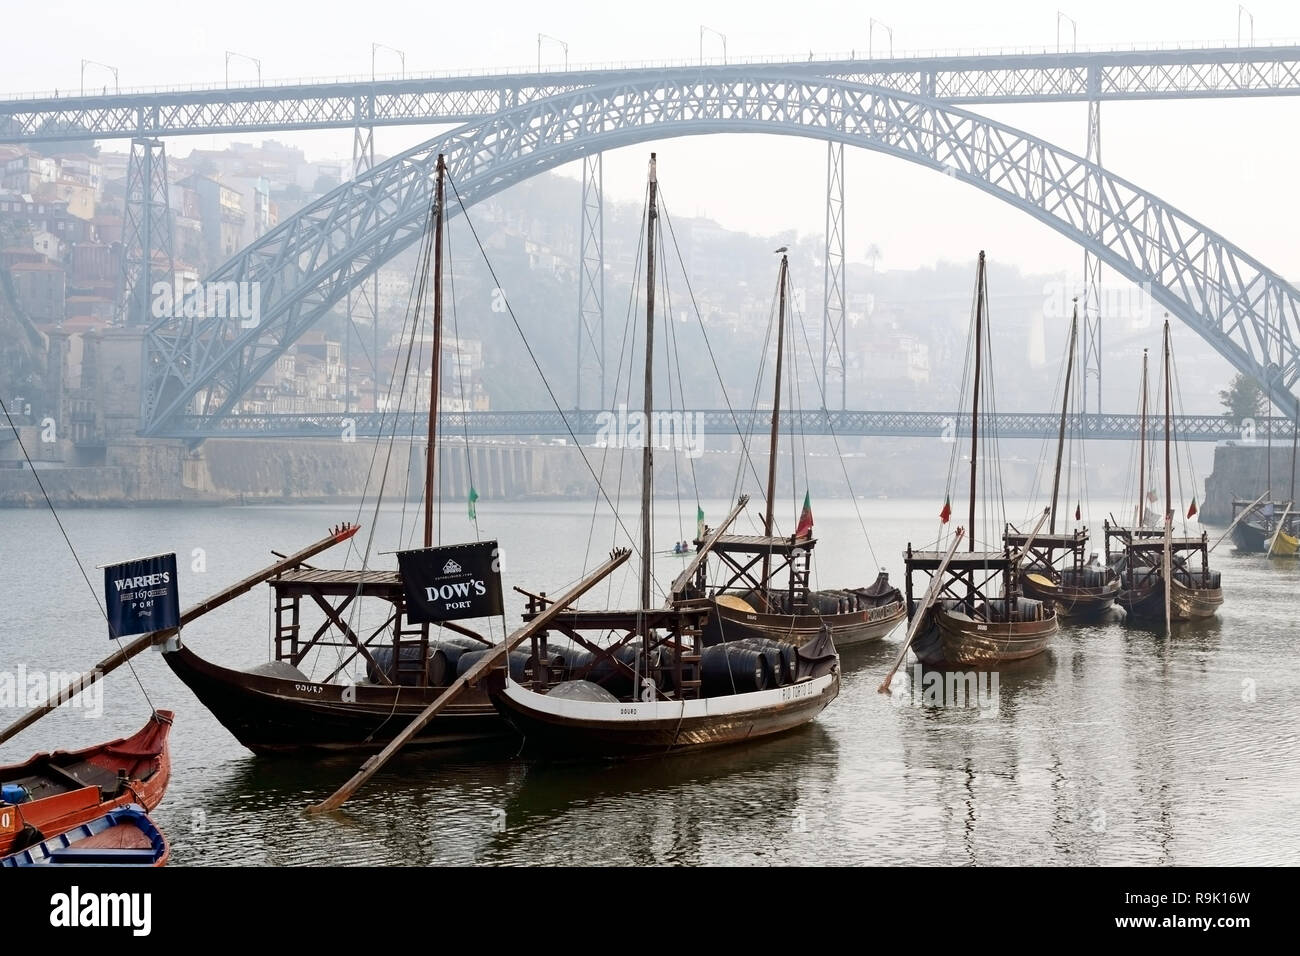 Porto, Portugal - March 31, 2012: Rabelo bats in a foggy morning Stock Photo